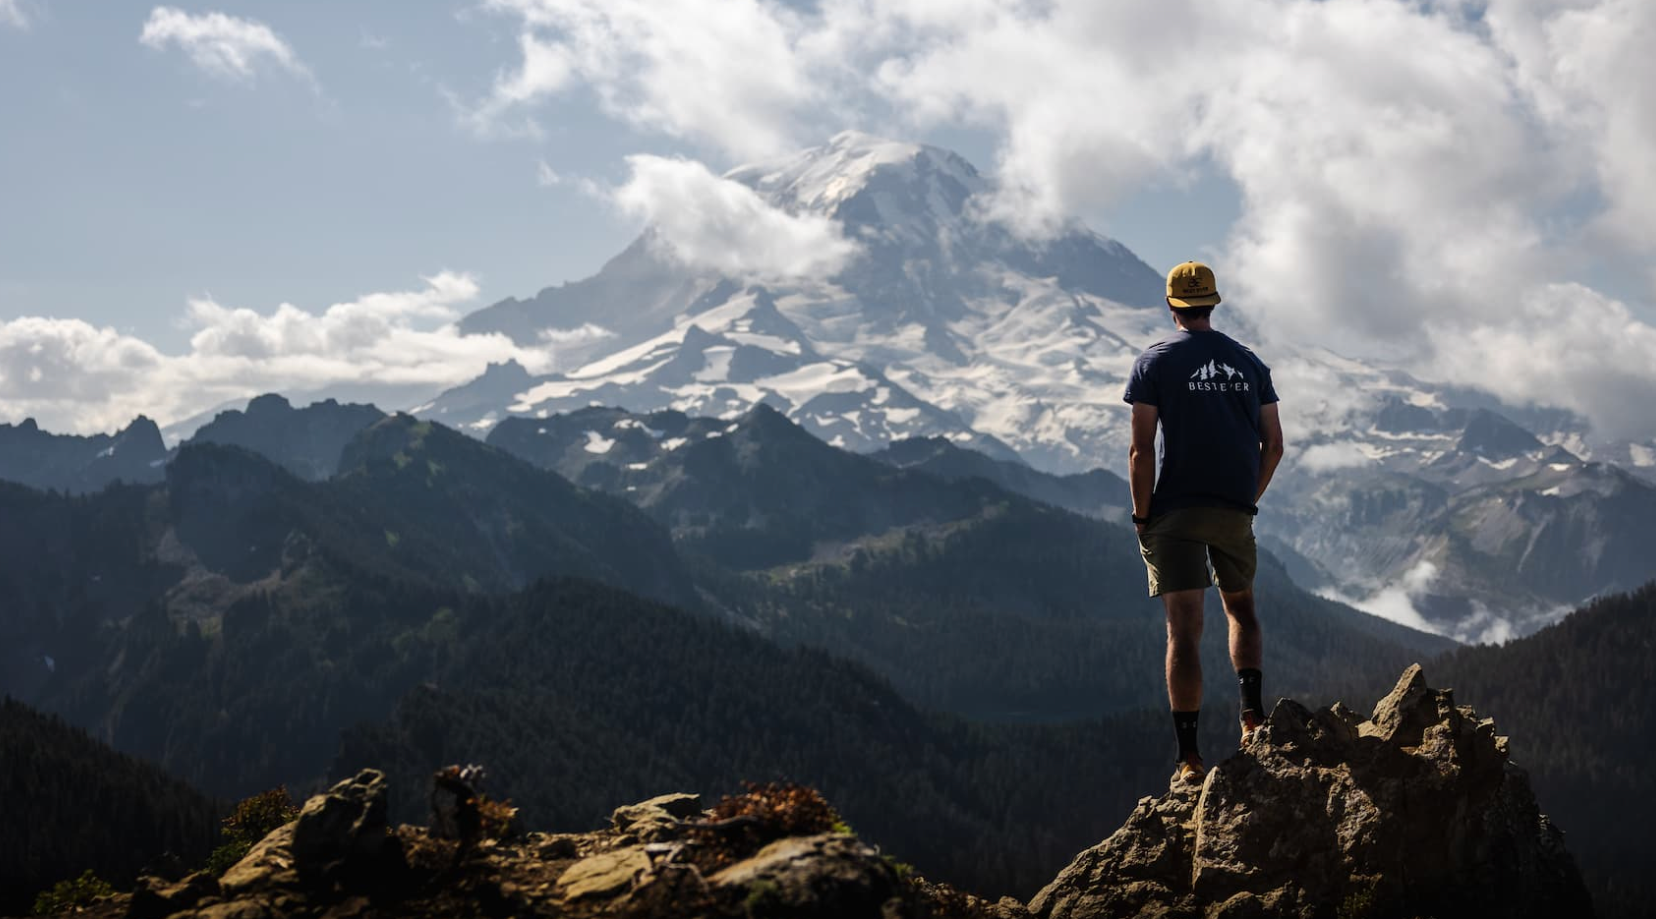 Man hiking while wearing best ever t-shirt